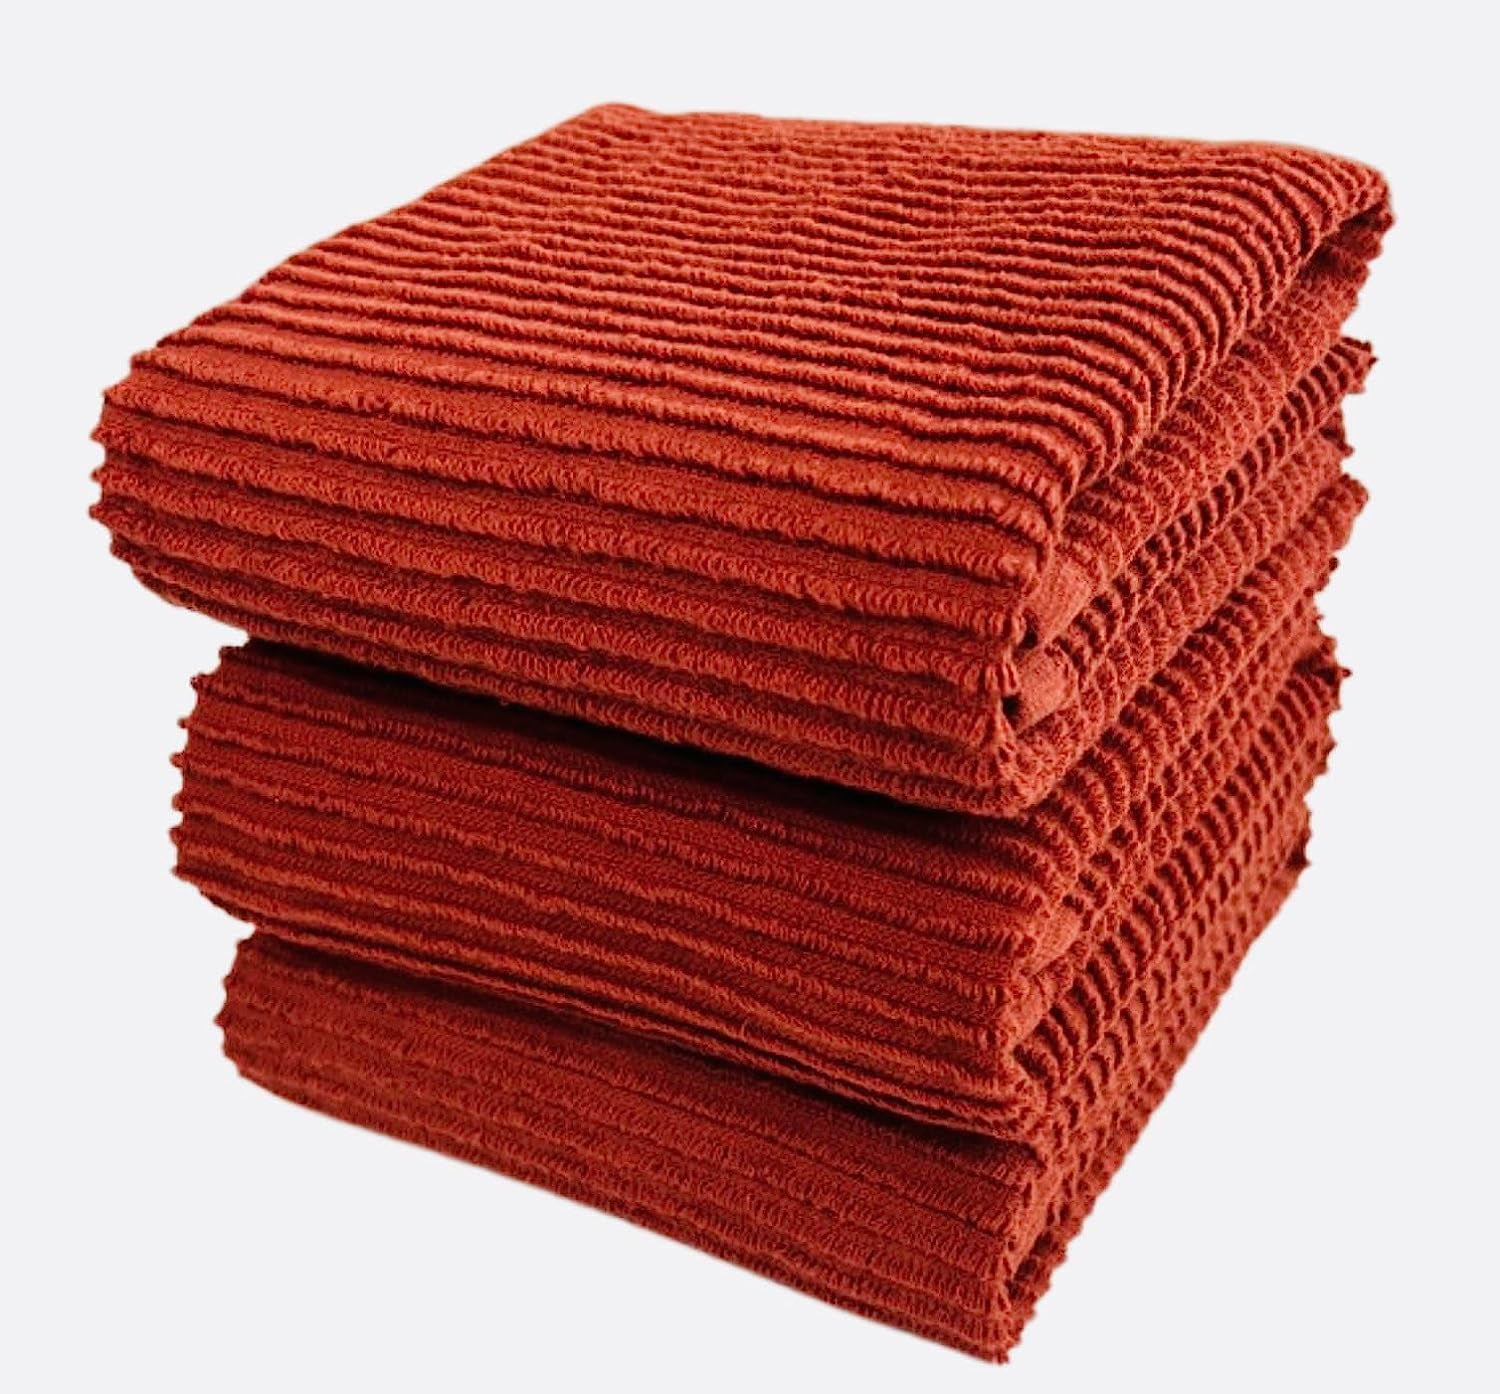 Utopia Towels Kitchen 12 Pack, 15 x 25 Inches, 100% Ring Spun Cotton Super  Soft and Absorbent Linen Dish Towels, Tea Bar Set (Orange)